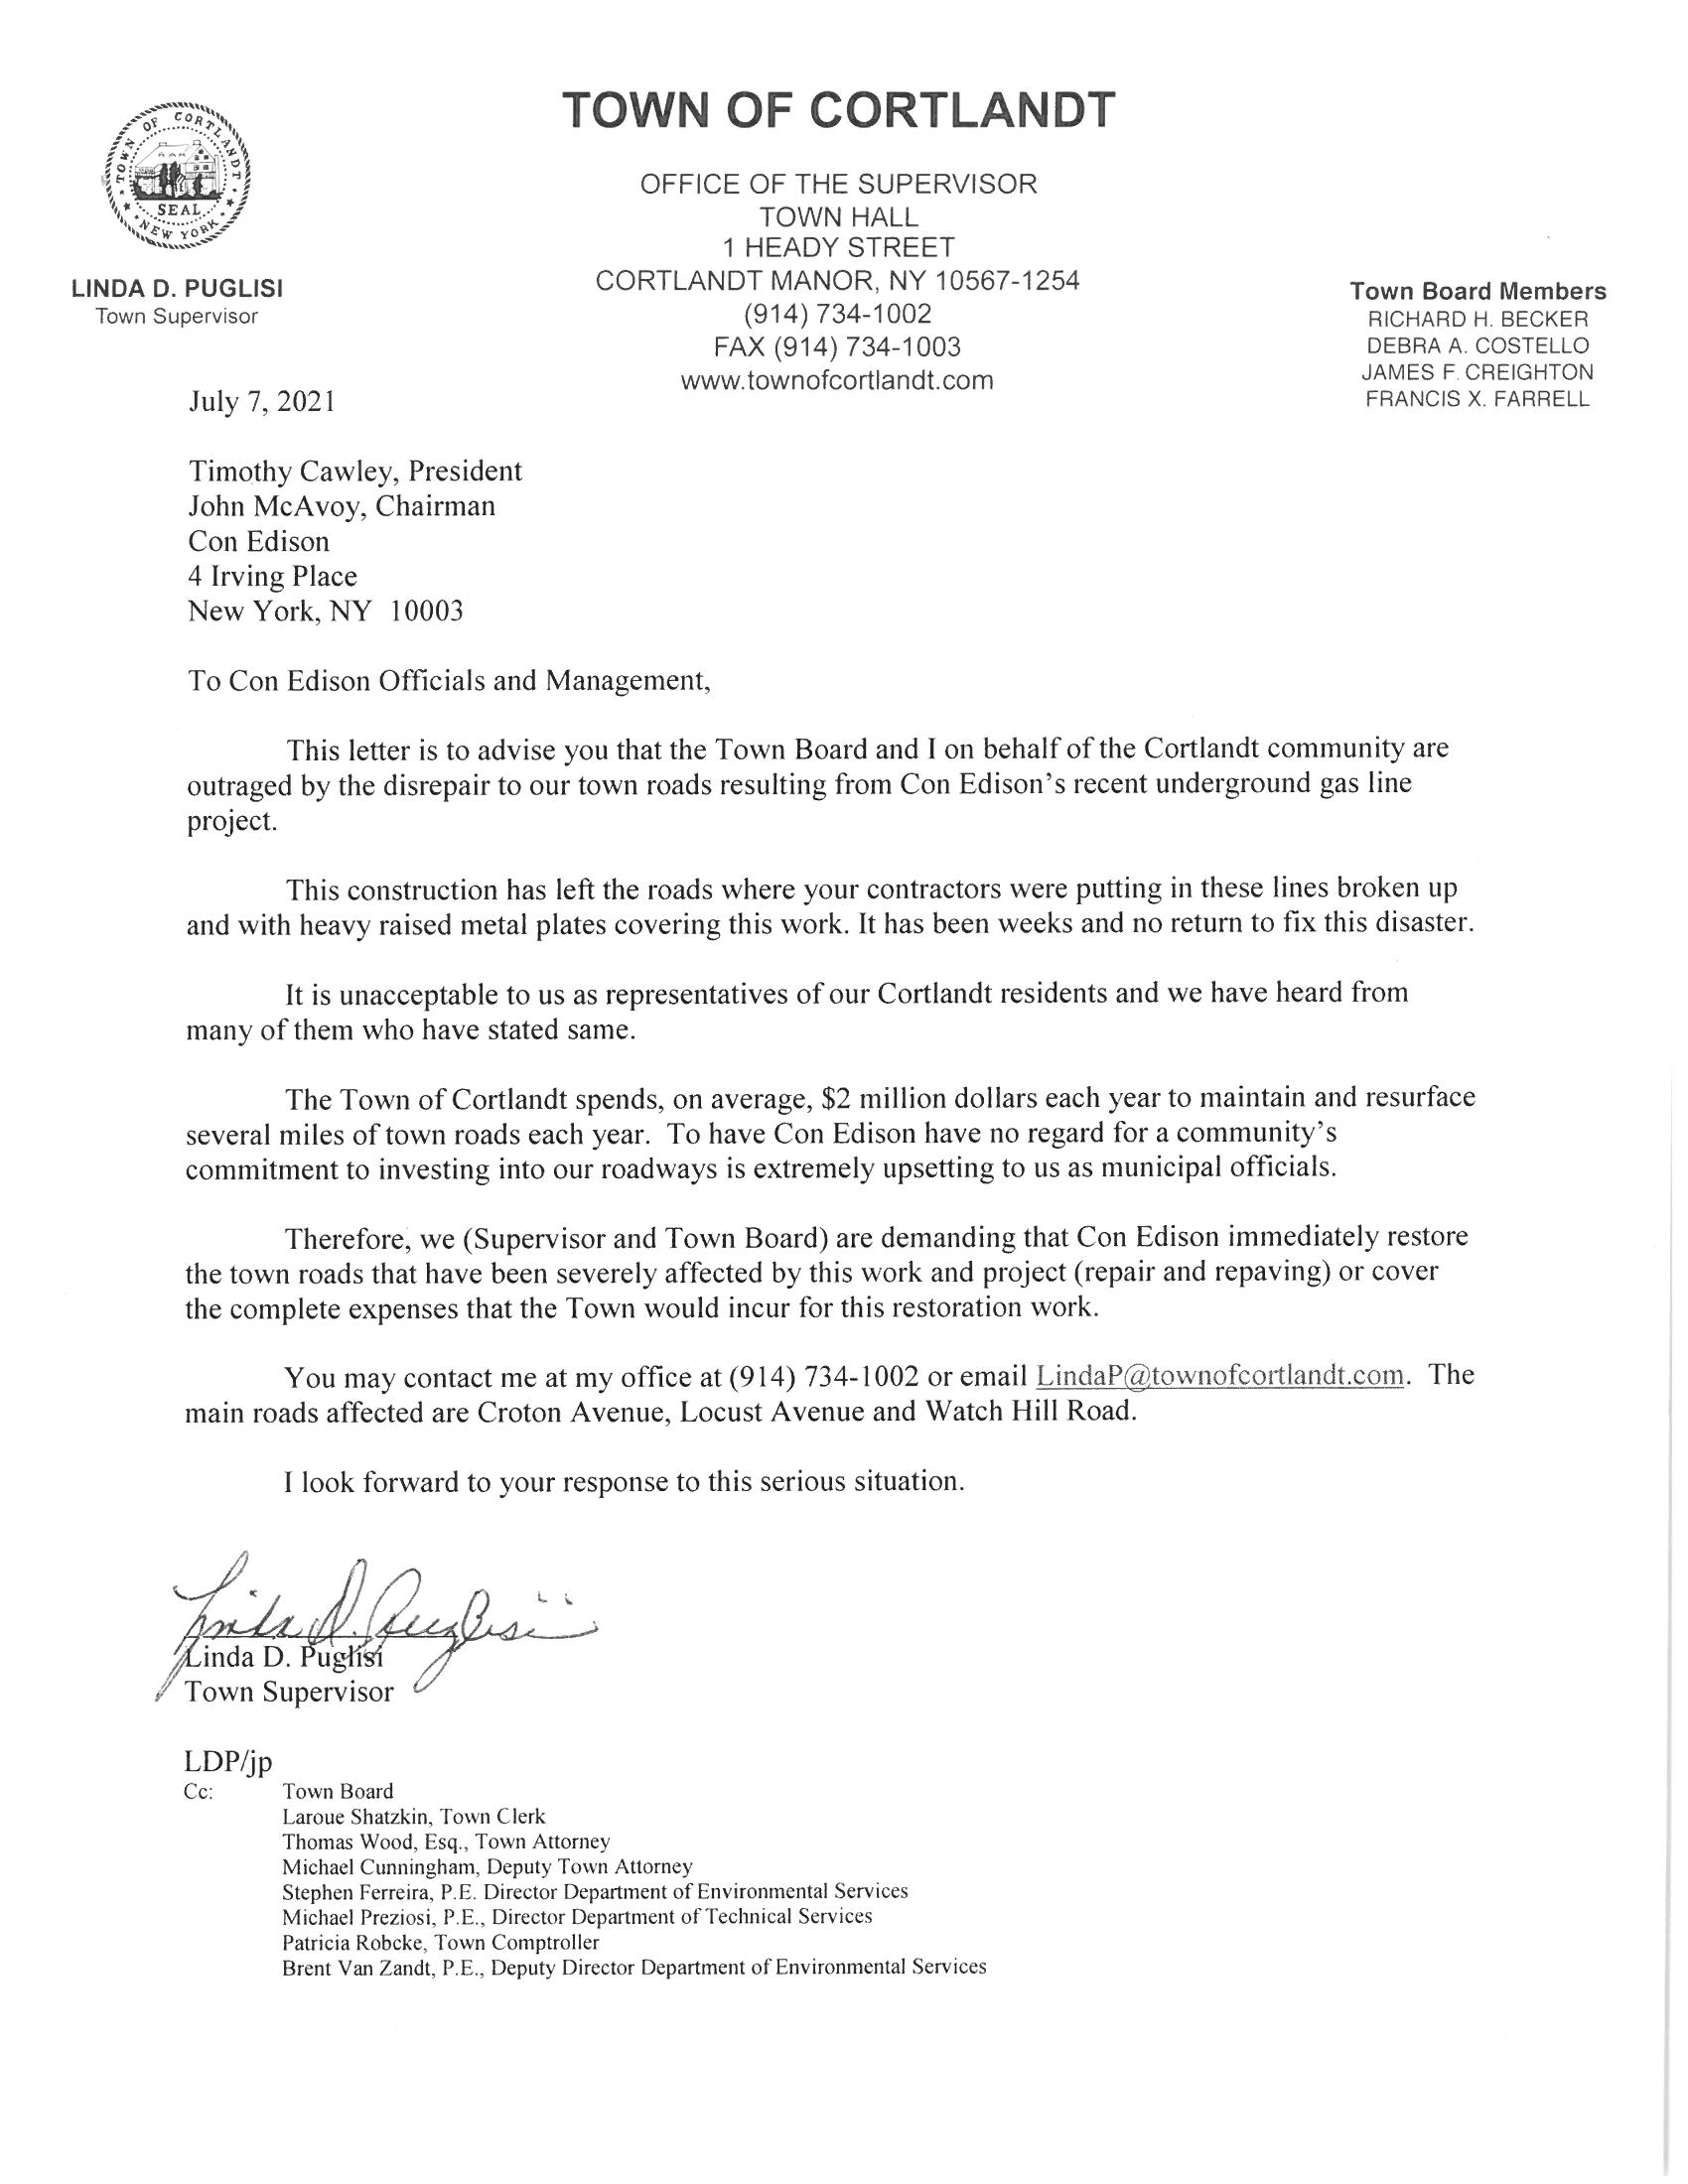 Letter to Con Edison Officials and Management7.9.21.jpg